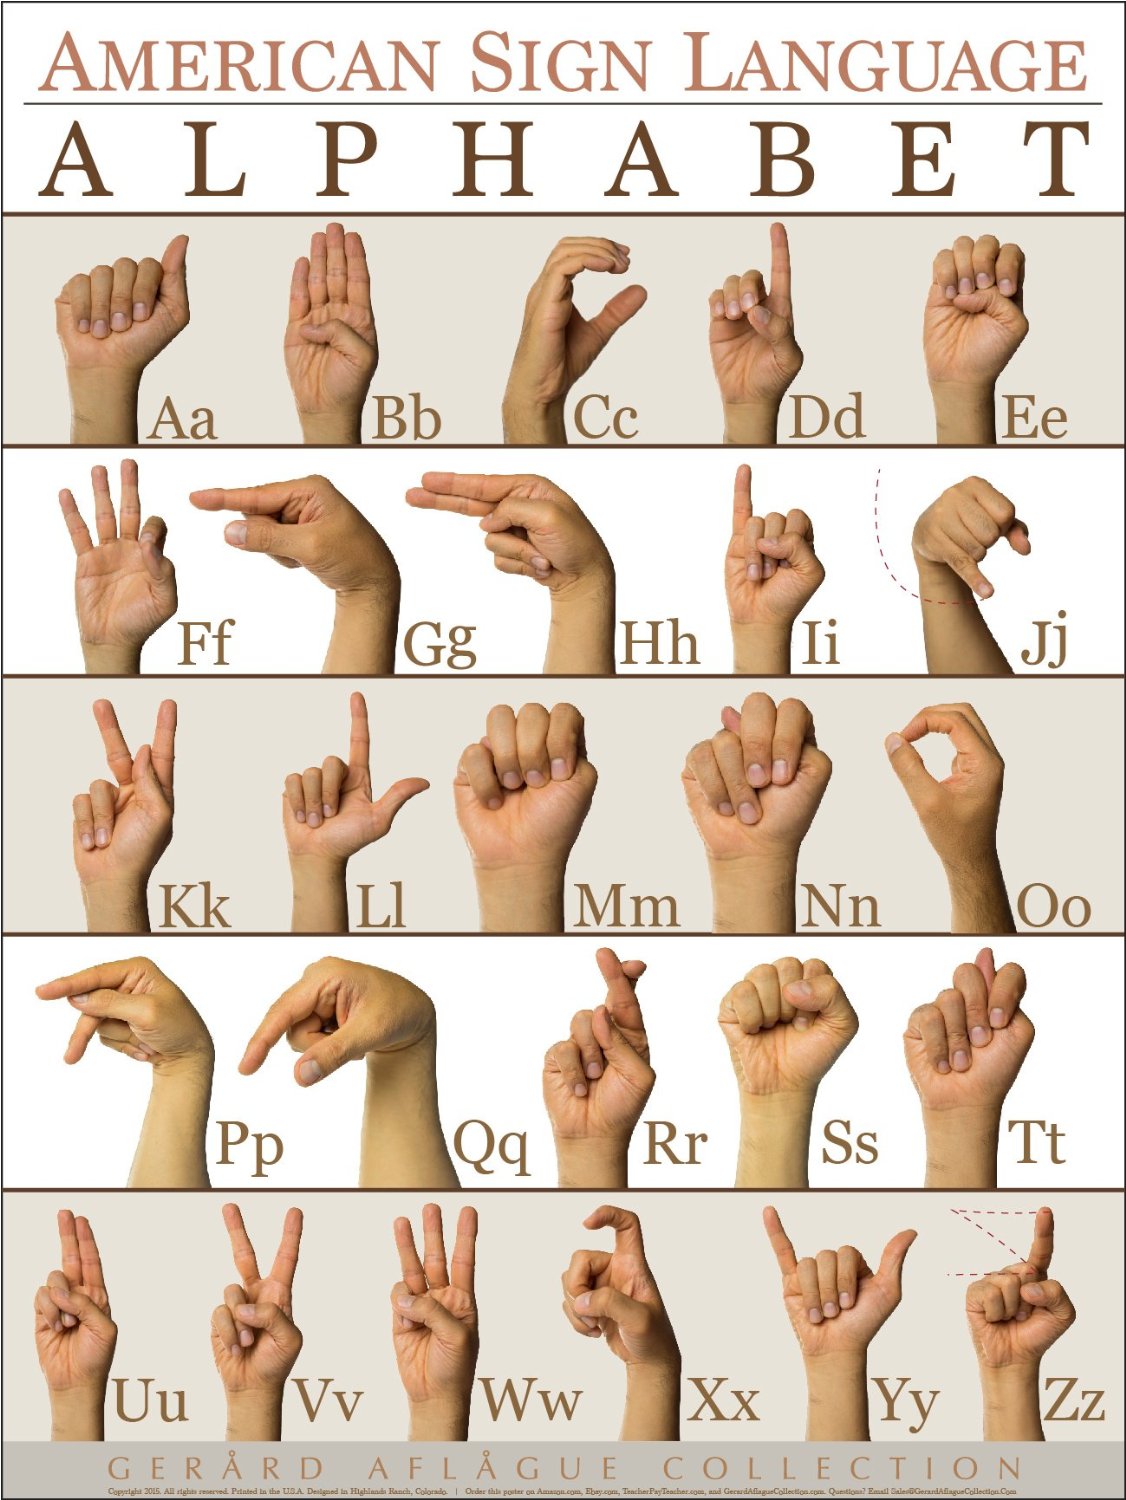 This is an 18x24 inch poster that depicts the 26 letters of the alphabet using the hand symbols of American Sign Language. This poster is perfect to teach children and adults how to finger sign the alphabets.